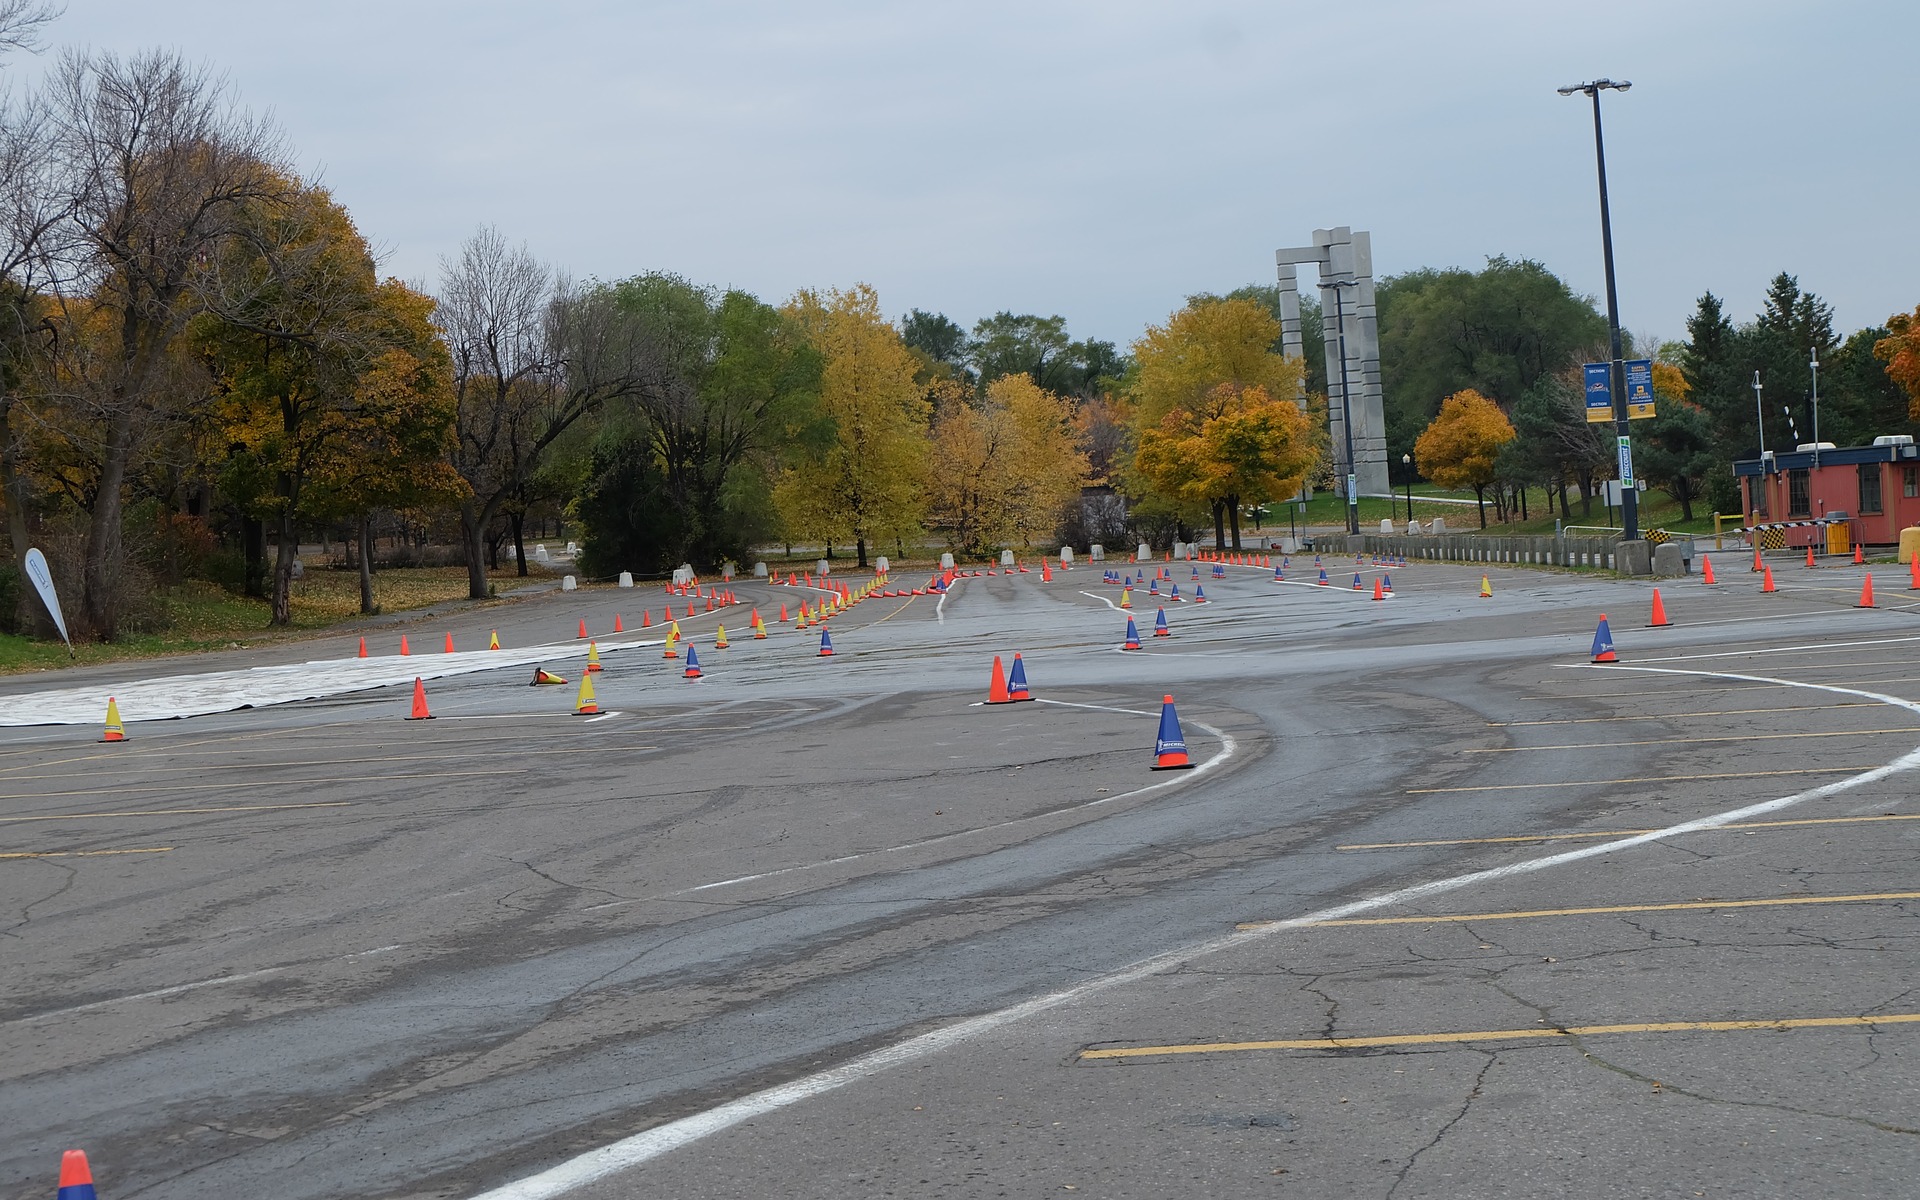 We faced a myriad of tests among these cones. 